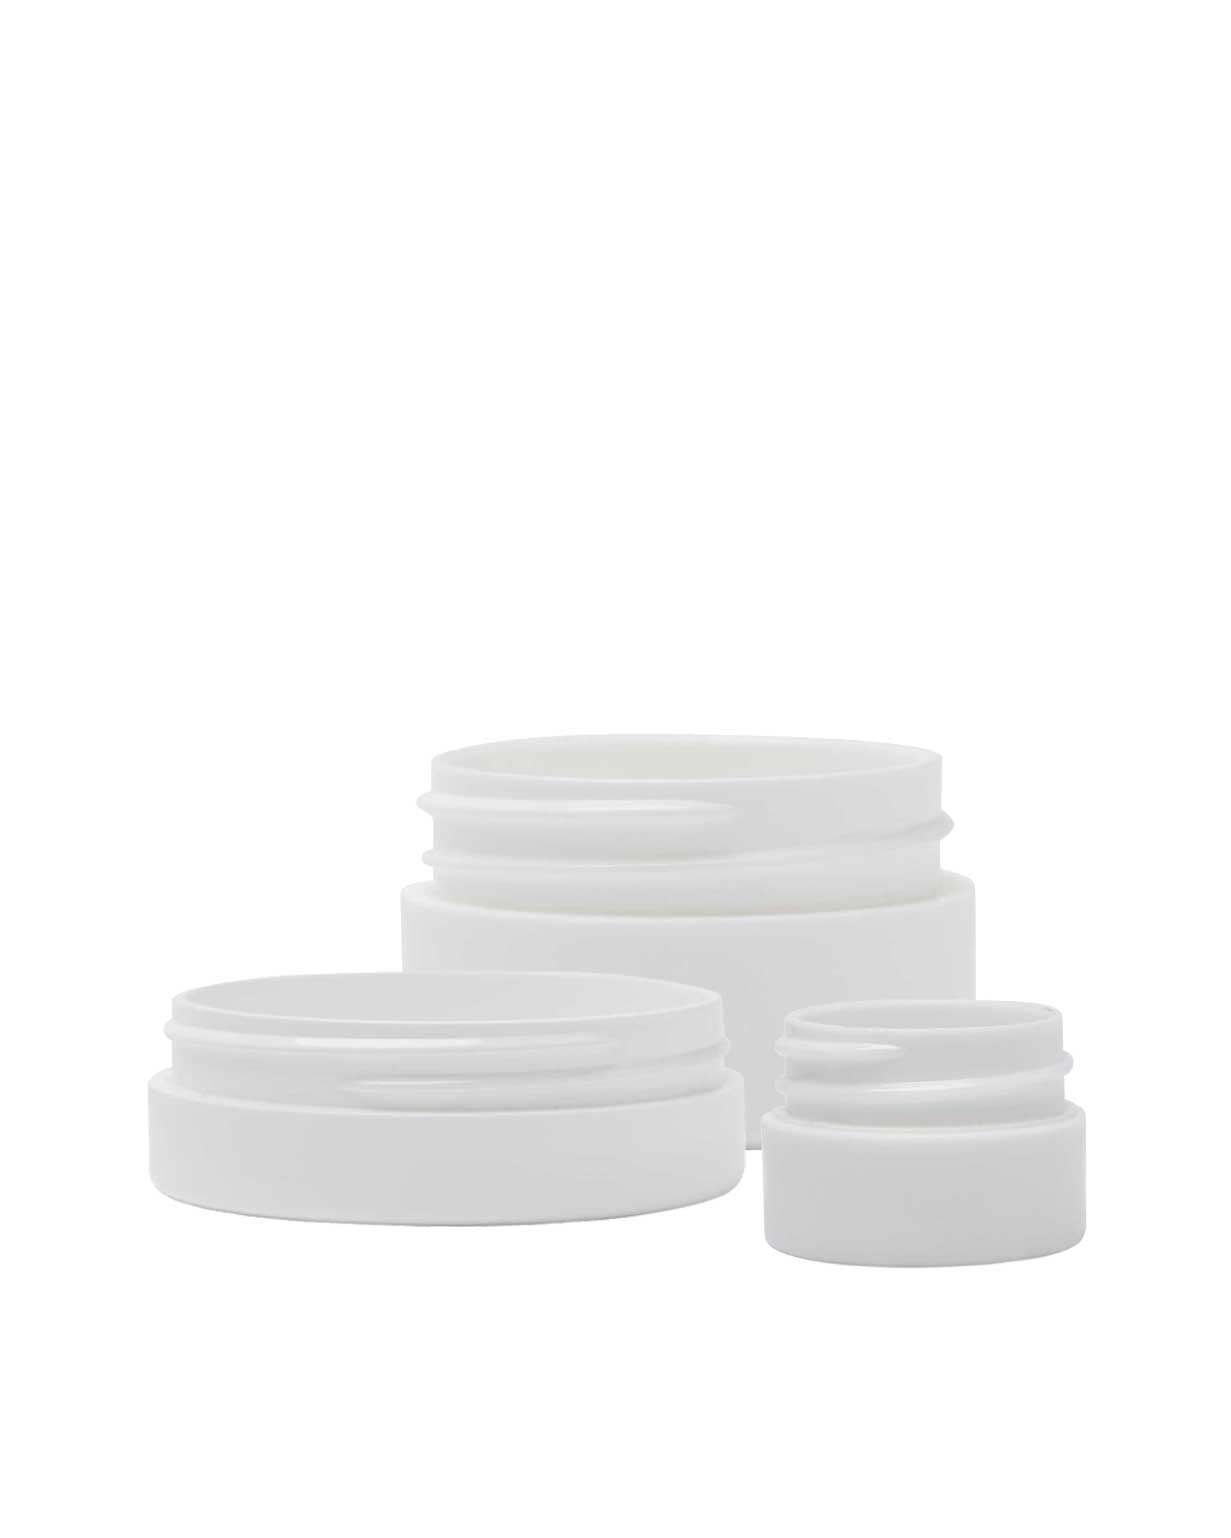 Plastic Wide Mouth Jars - Paramount Global